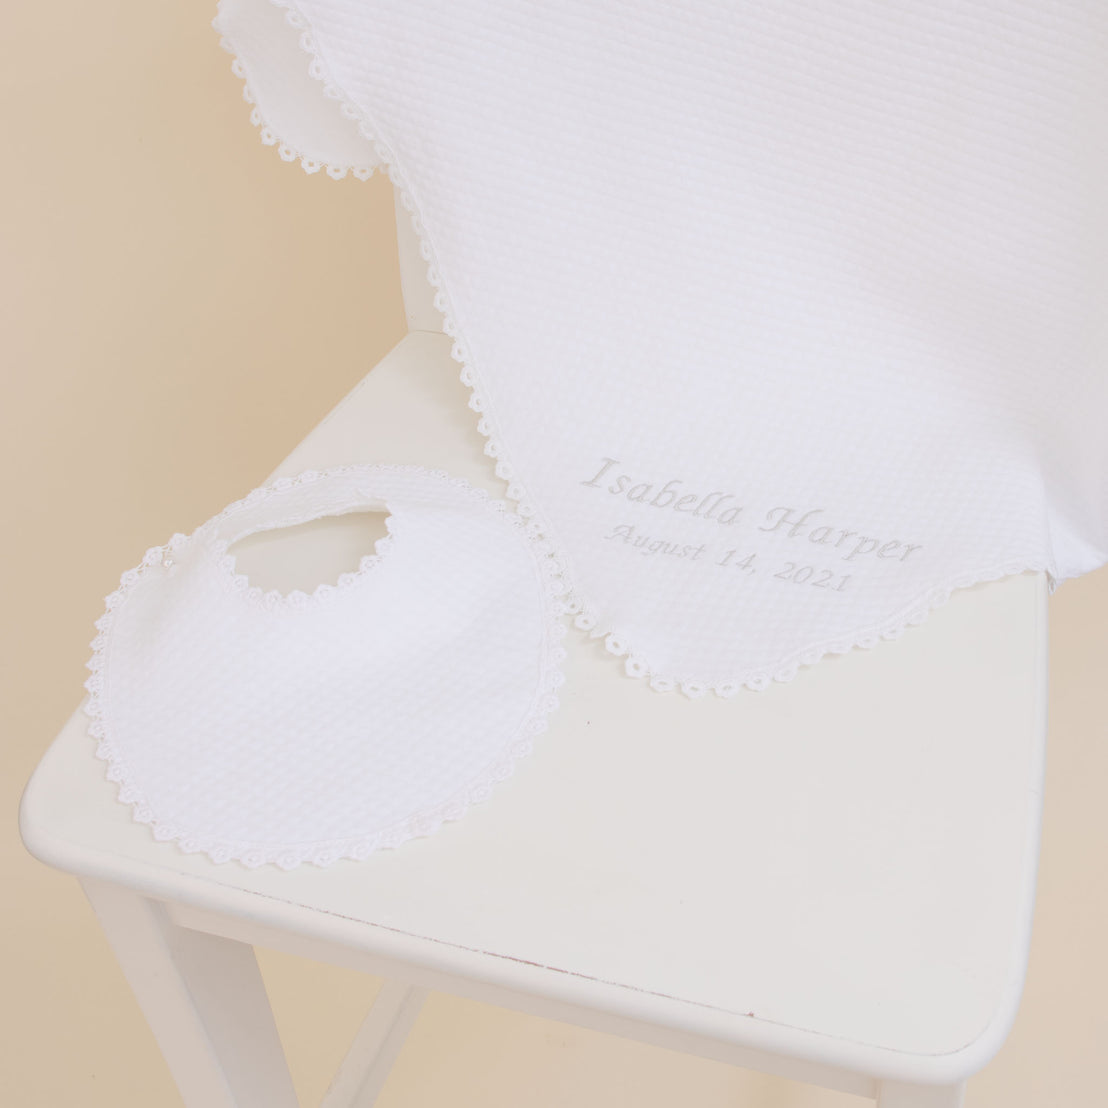 A Baby Beau & Belle Baby Girl Personalized Gift Set, consisting of a white quilted cotton bib and blanket embroidered with the name "Isabella Harper August 14, 2021," displayed on a white chair against a beige background.